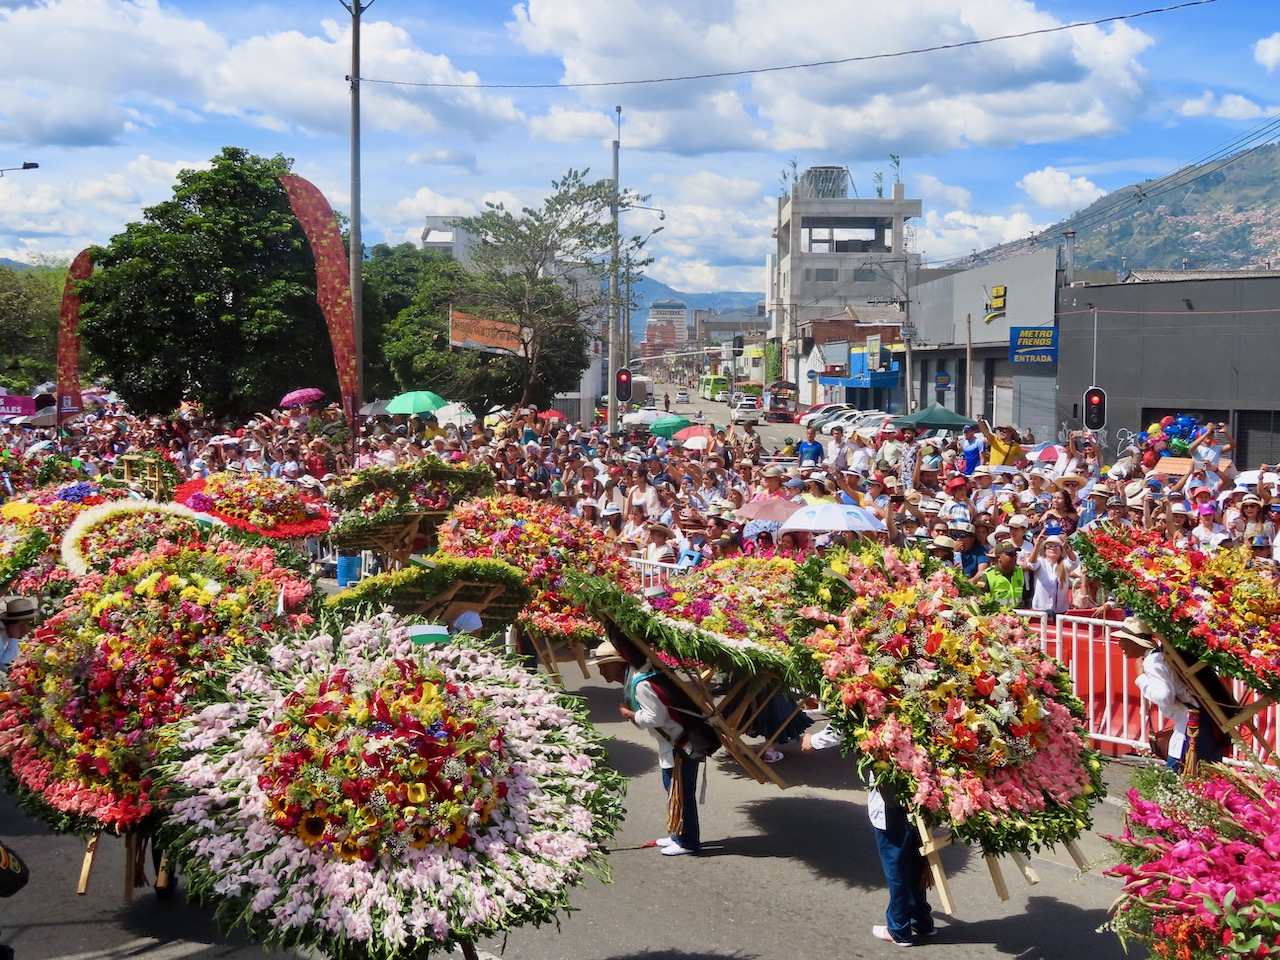 Meet The Silleteros: Porters of the Colombian Flower Parade